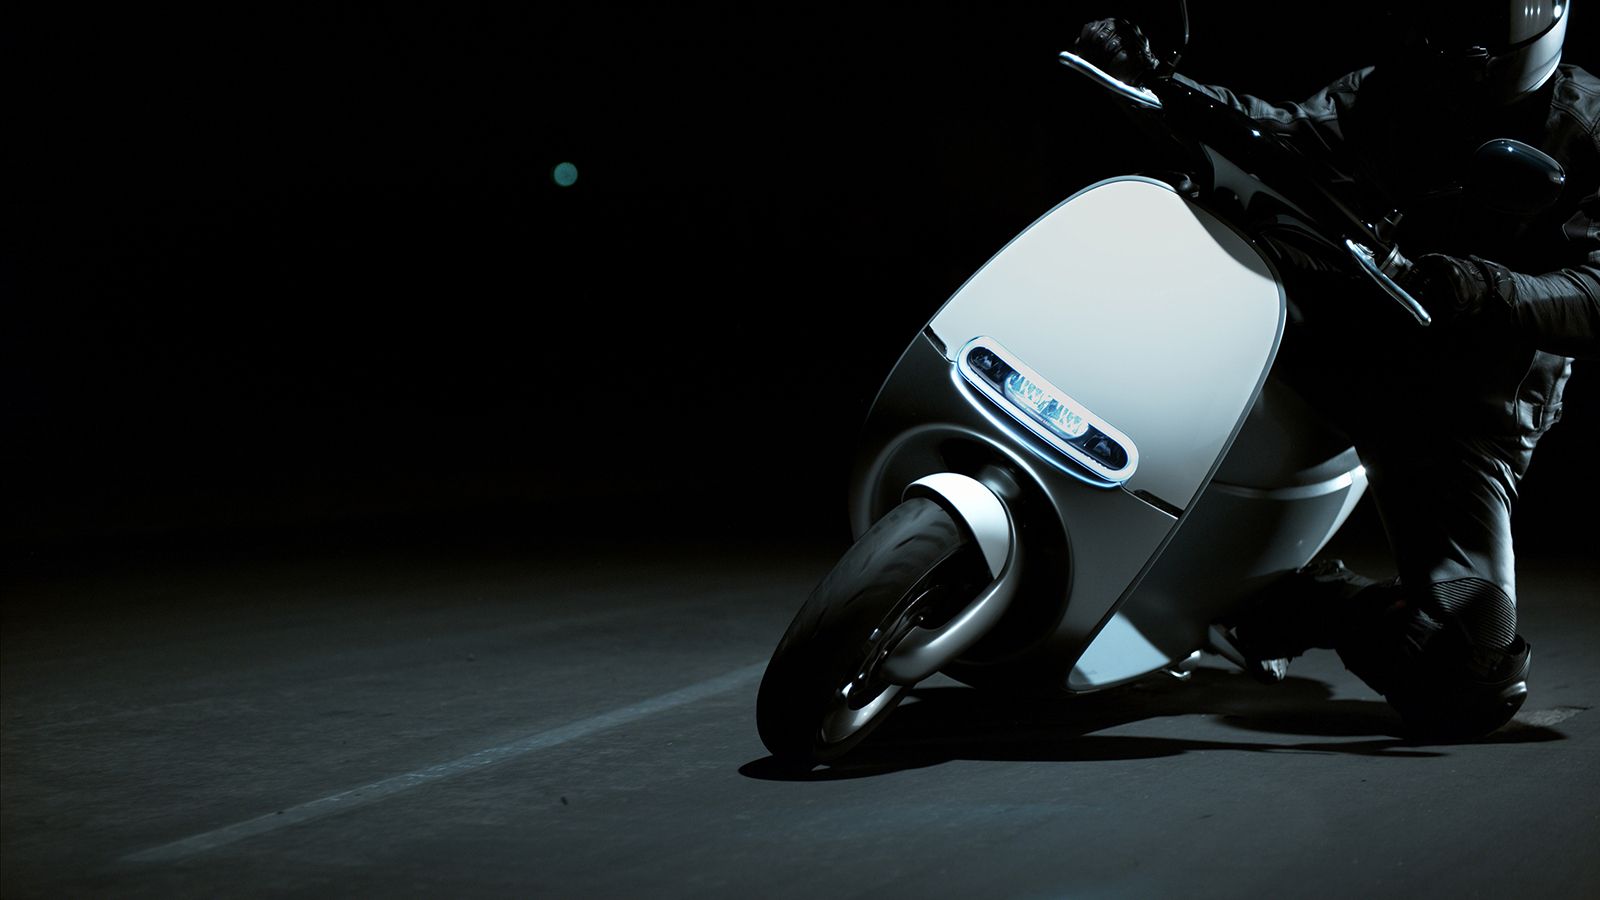 gogoro electric scooter with unlimited range comes to europe image 1